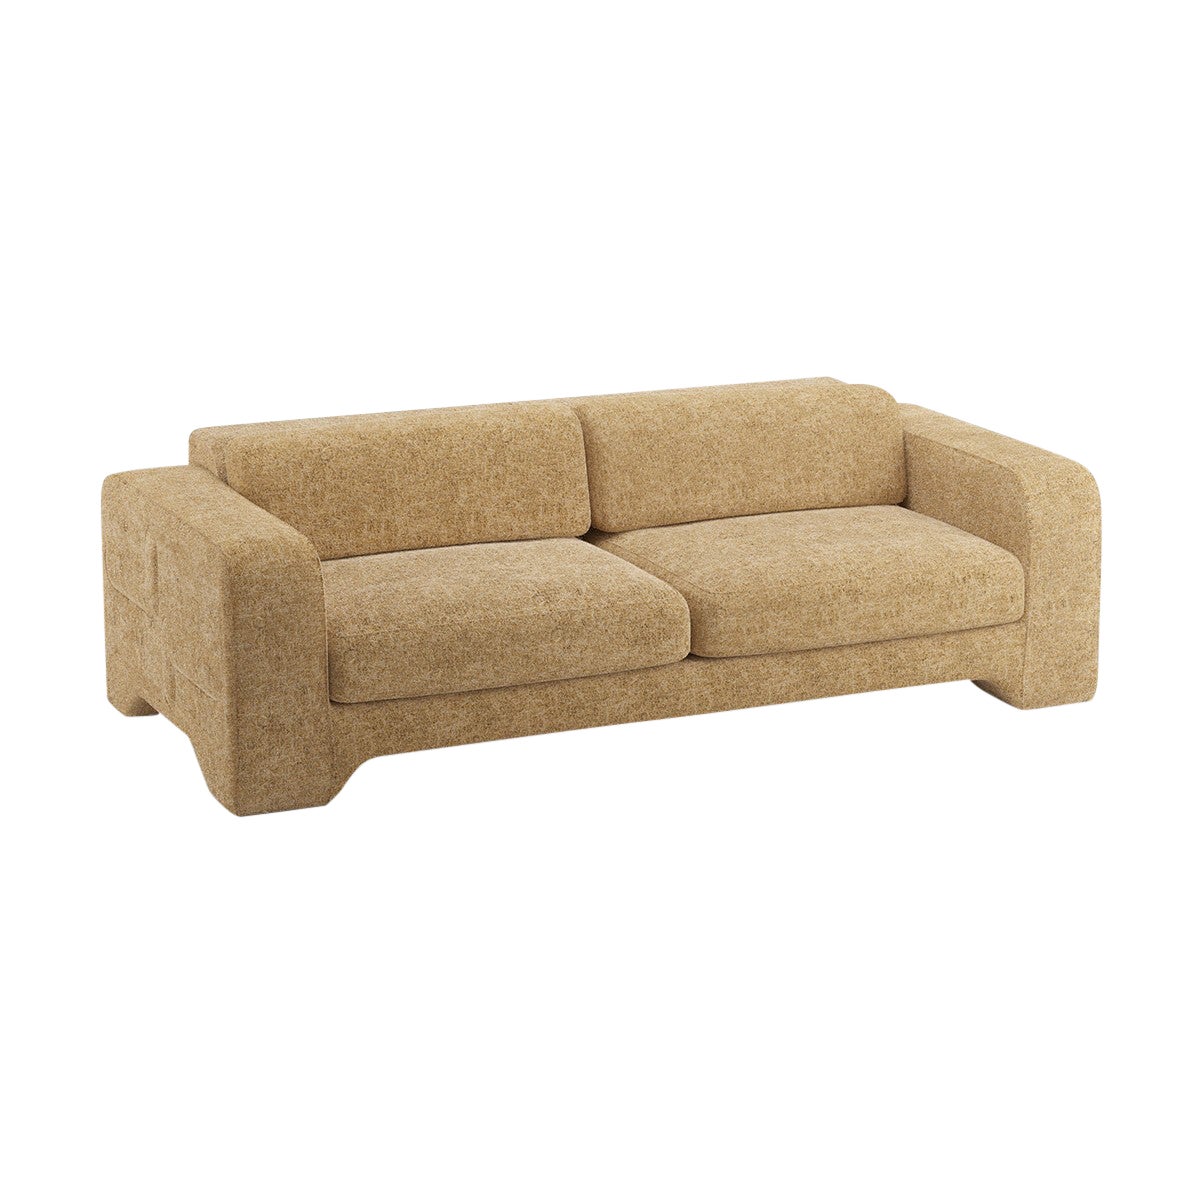 Popus Editions Giovanna 2.5 Seater Sofa in Ocher London Linen Fabric For Sale